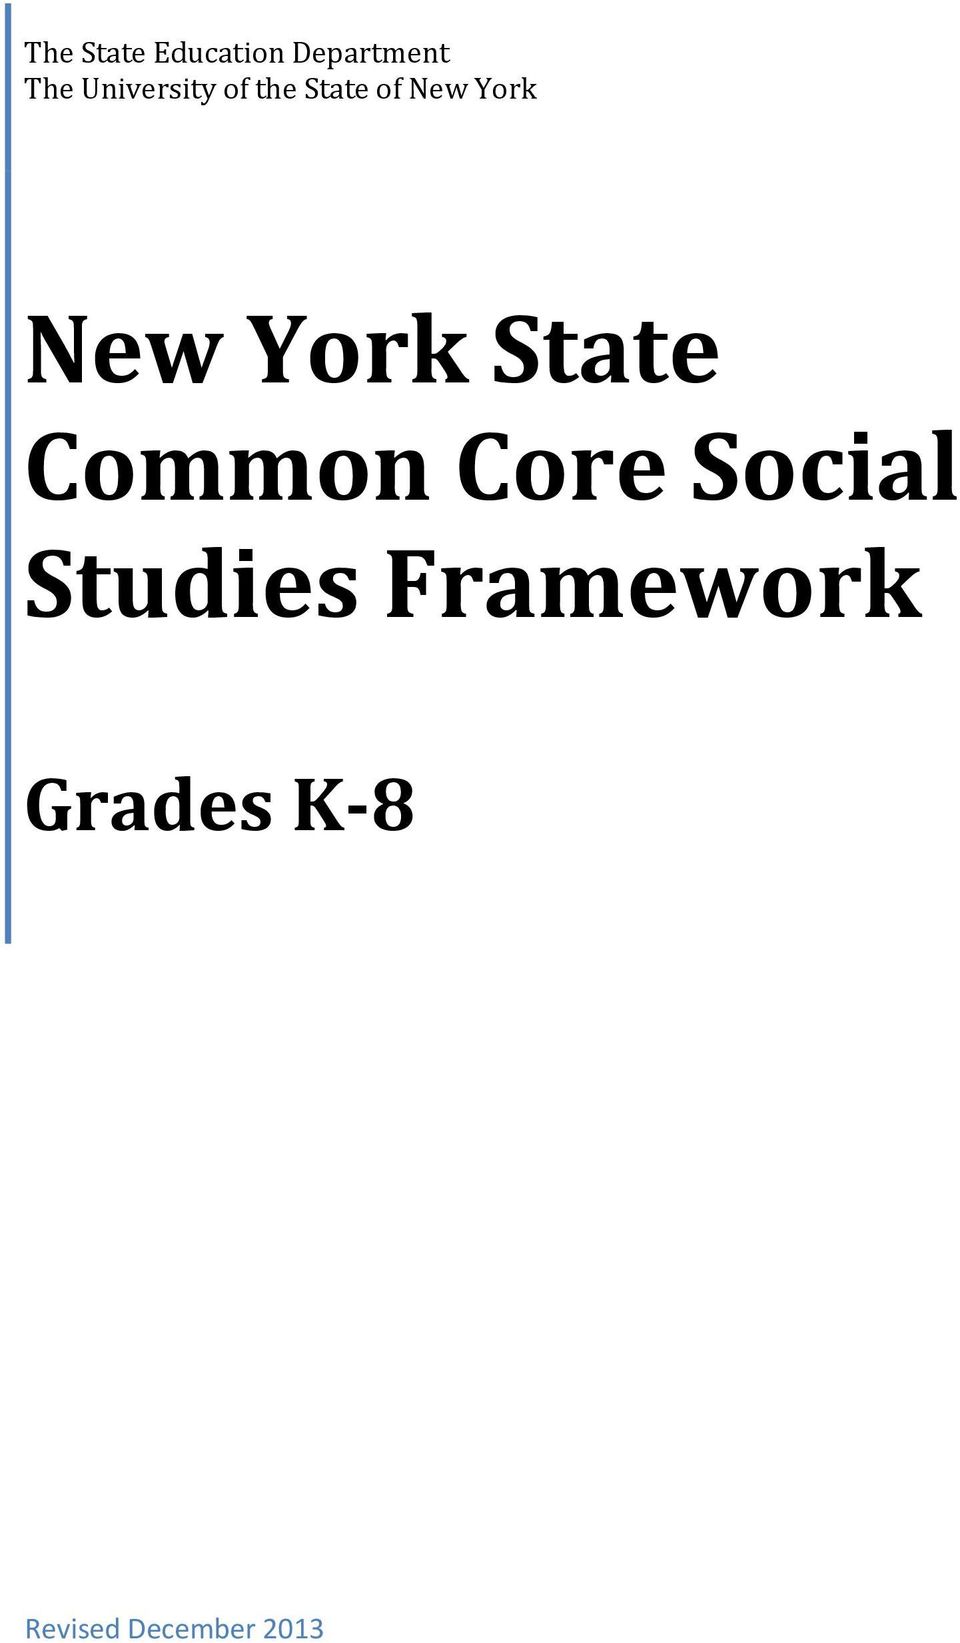 New York State Common Core Social